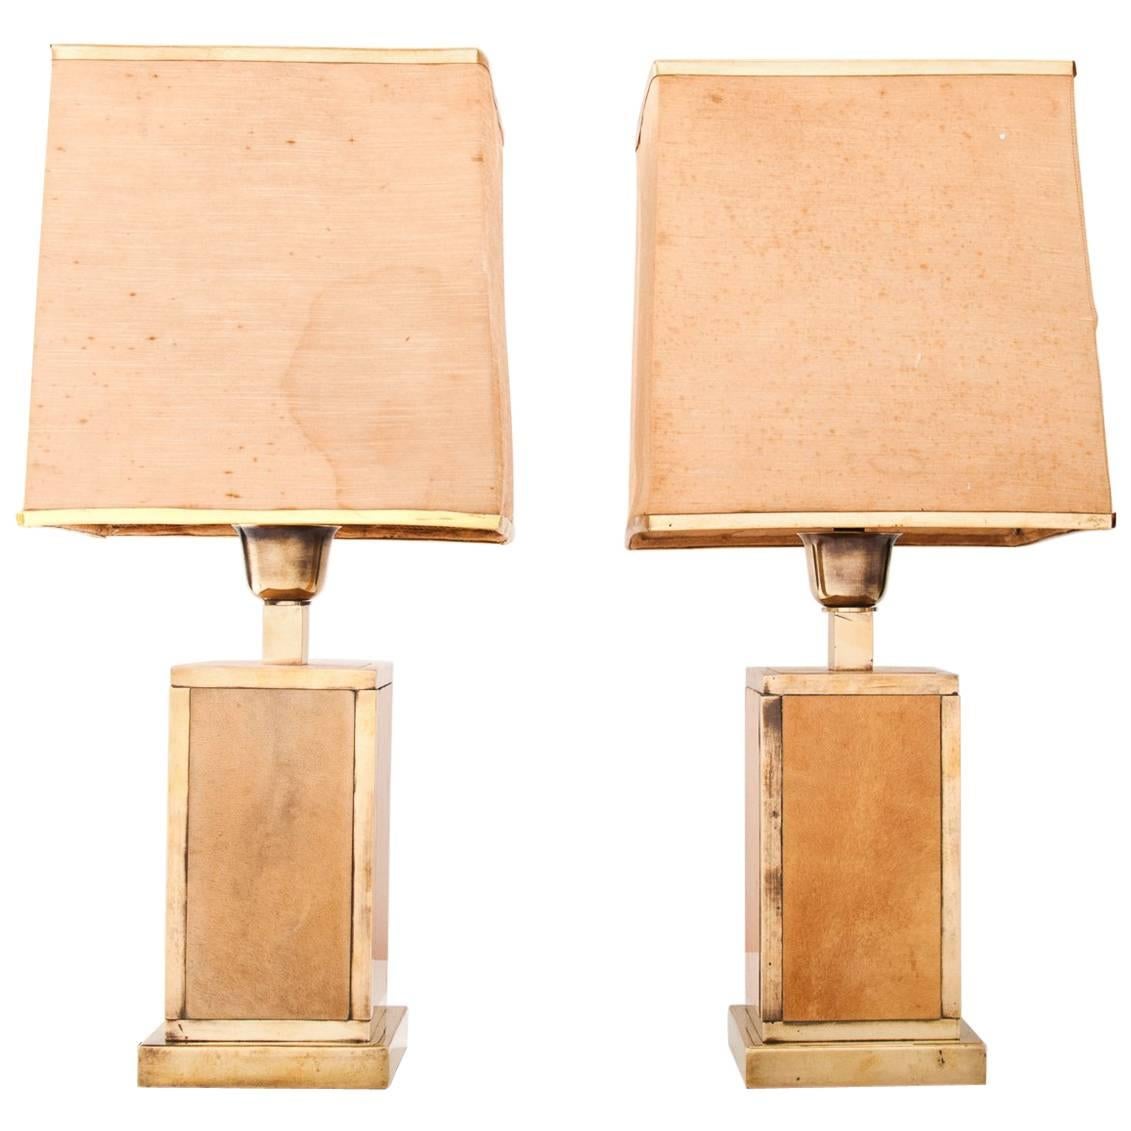 Rare Pair of Mid-Century Aldo Tura Lacquered Parchment and Brass Table Lamps